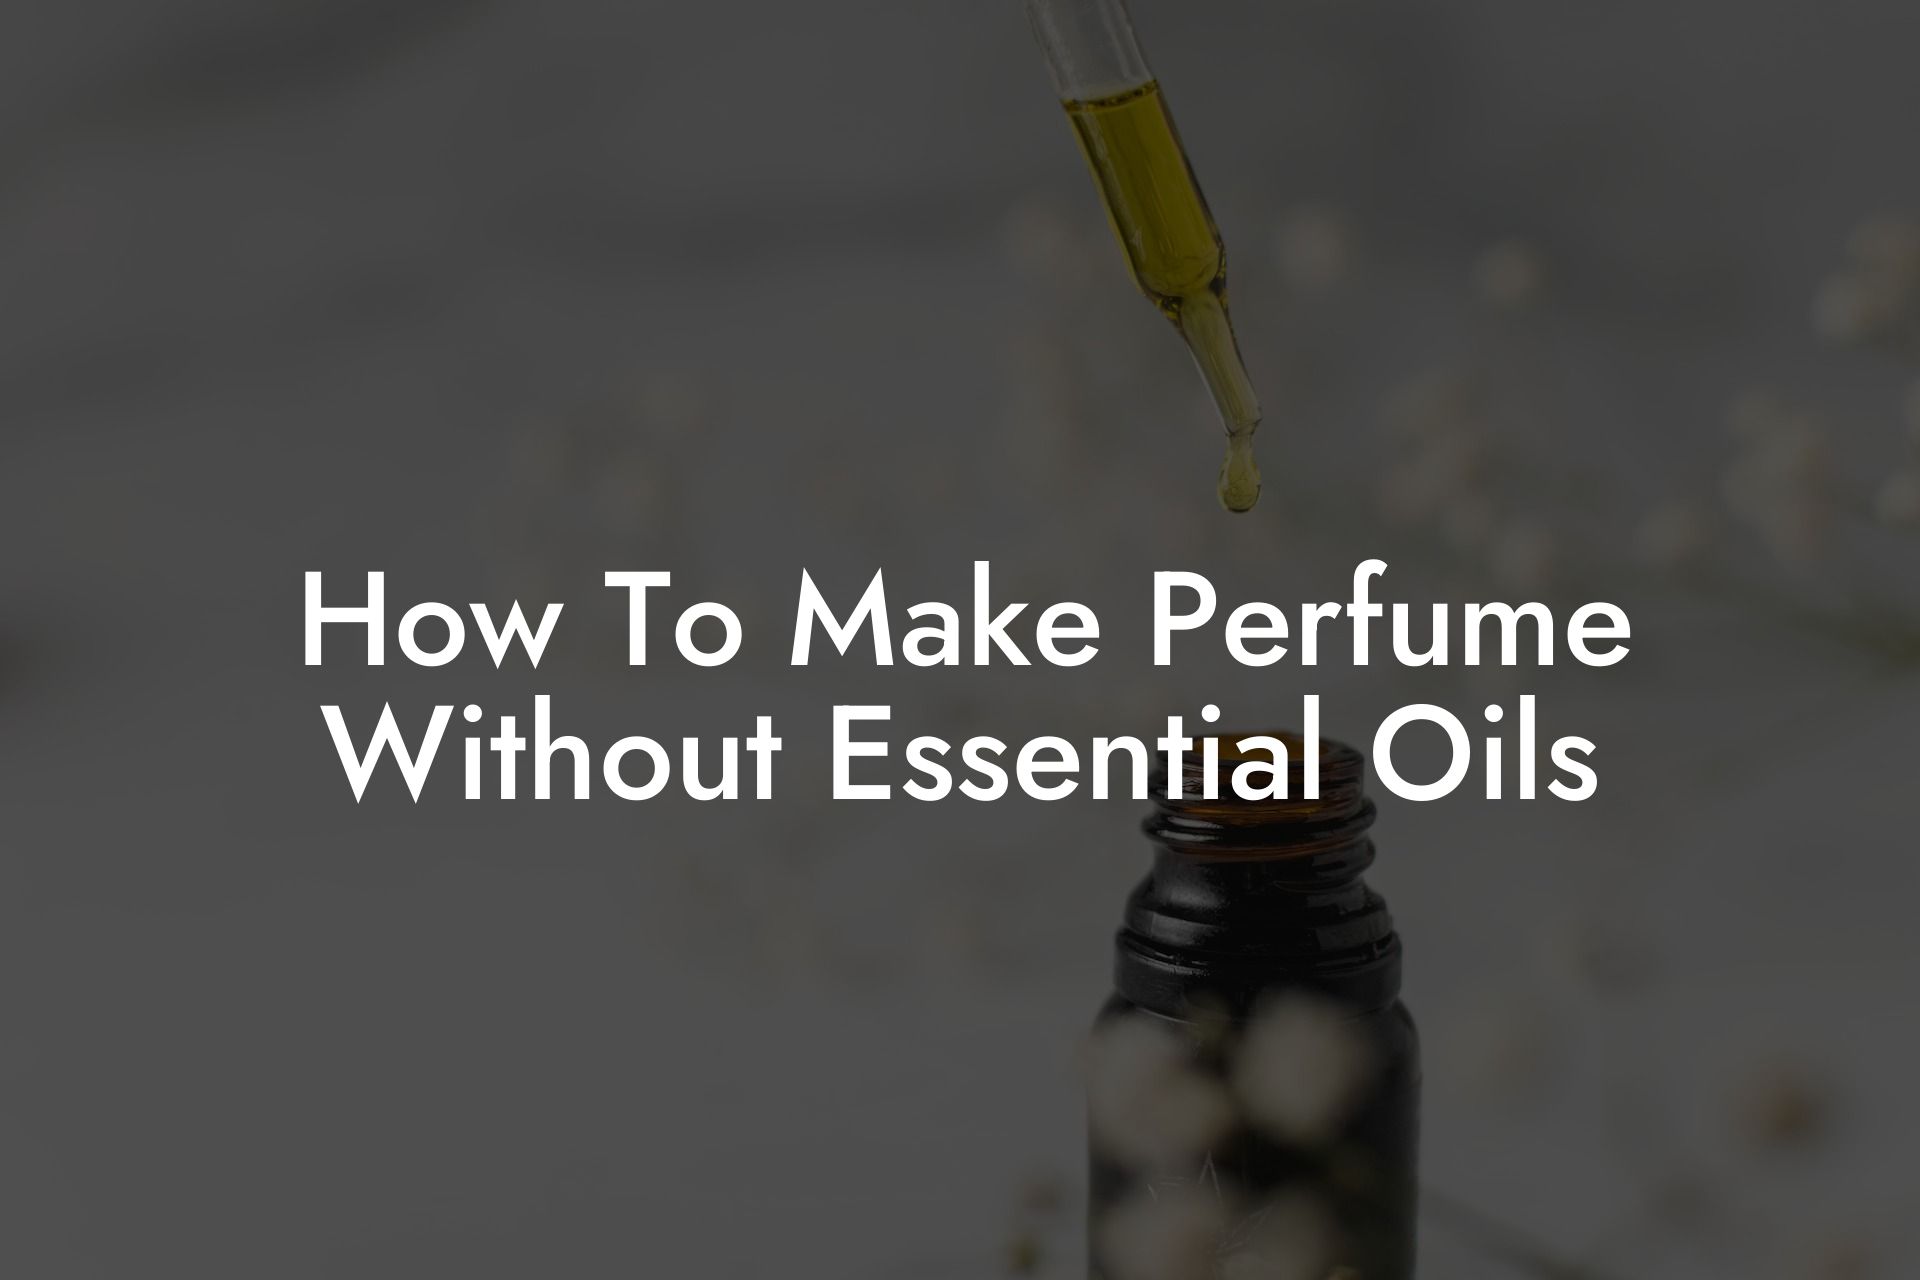 How To Make Perfume Without Essential Oils